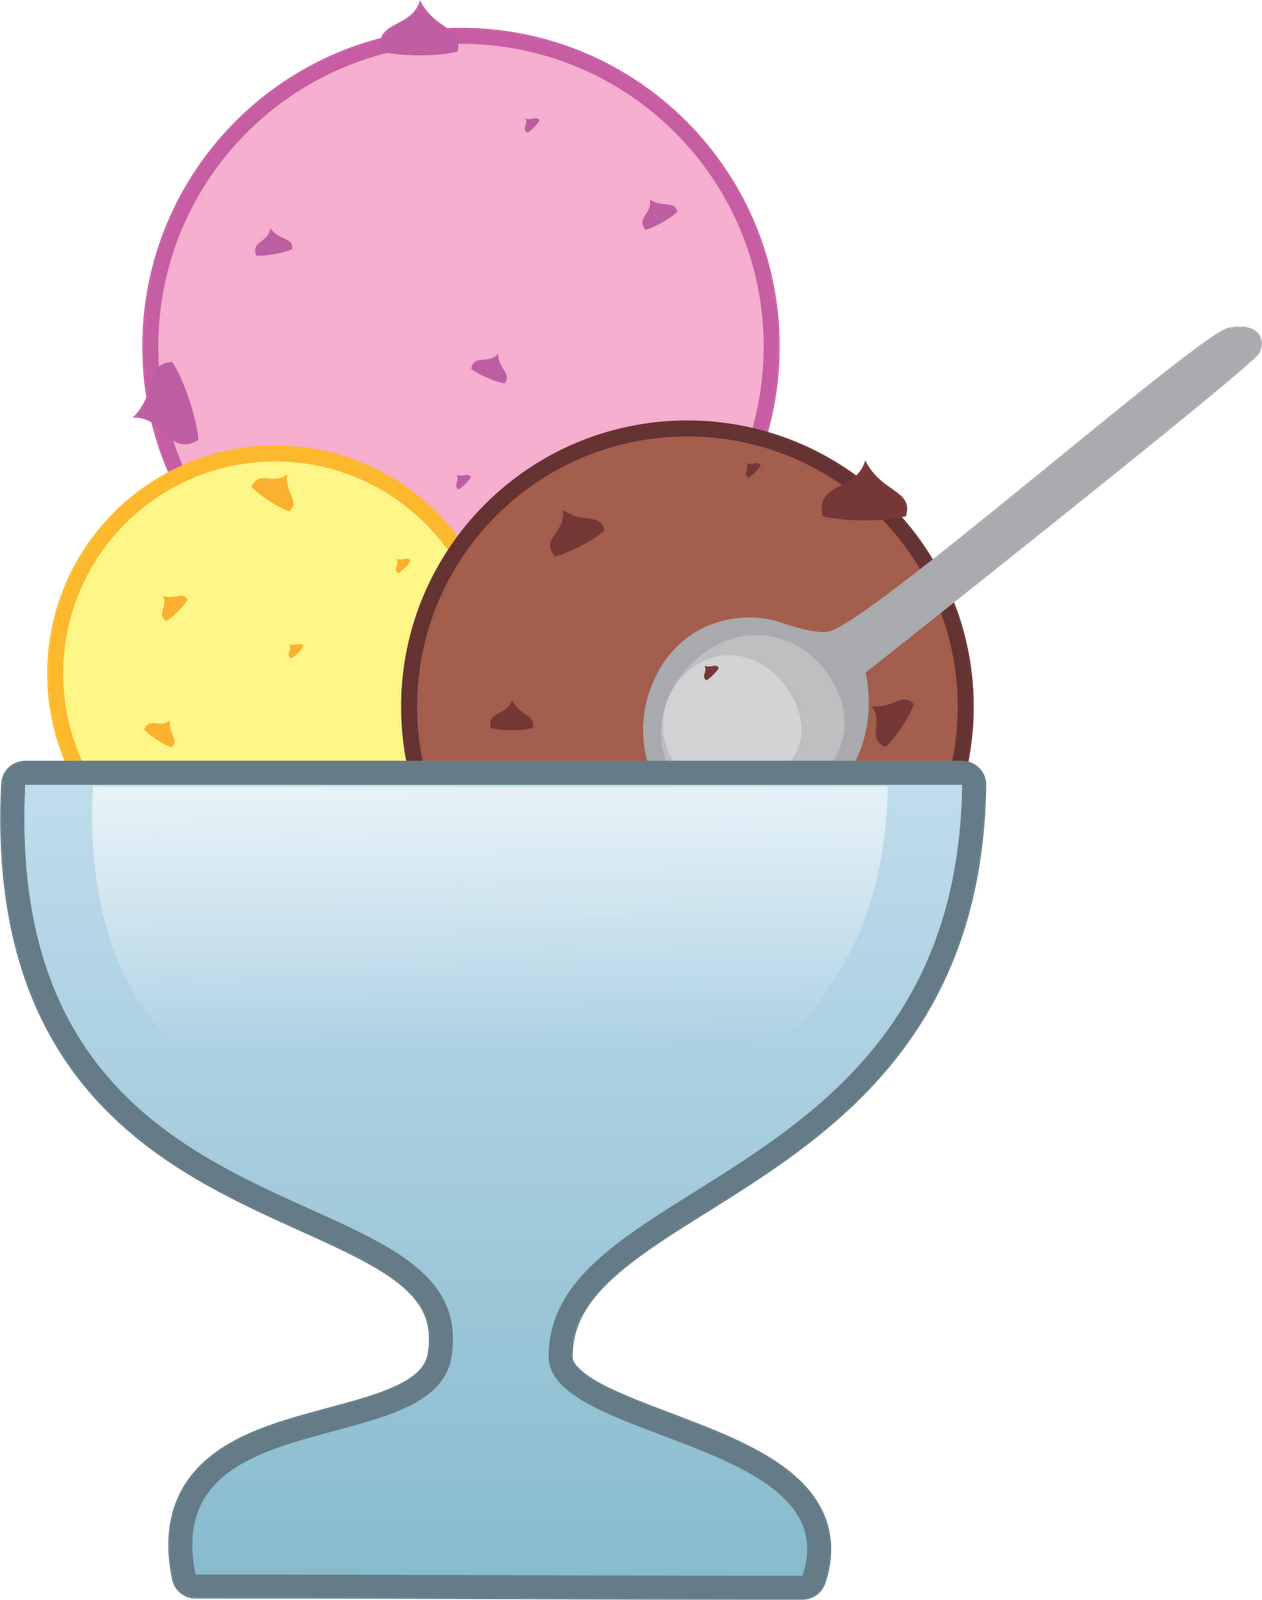 ice cream in a bowl clipart - photo #18